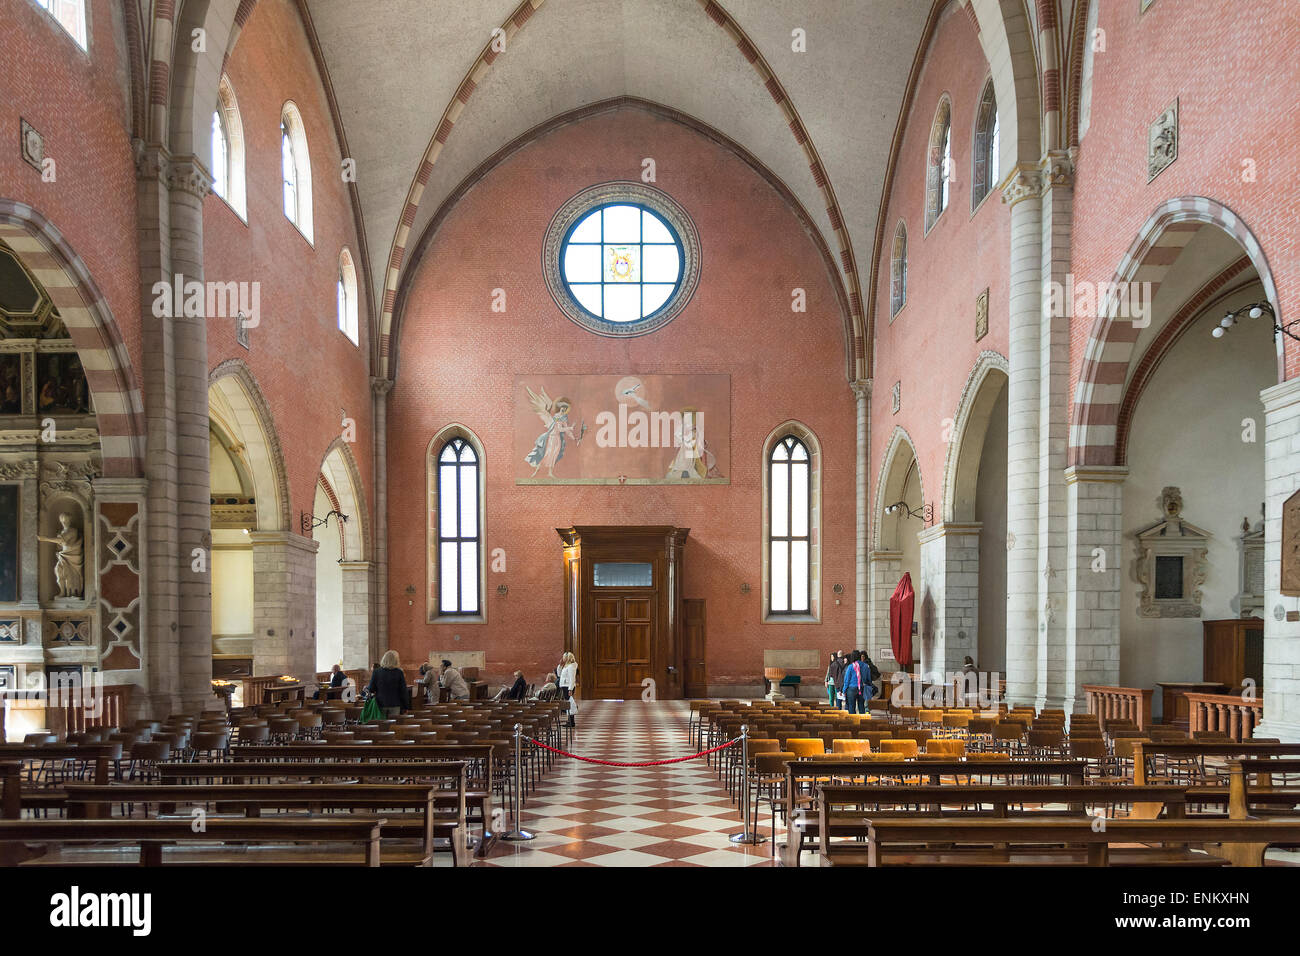 Vicenza,Italy-April 3,2015:view of the interior of the dome of Santa Maria Annunziata in the center of Vicenza during a sunny da Stock Photo